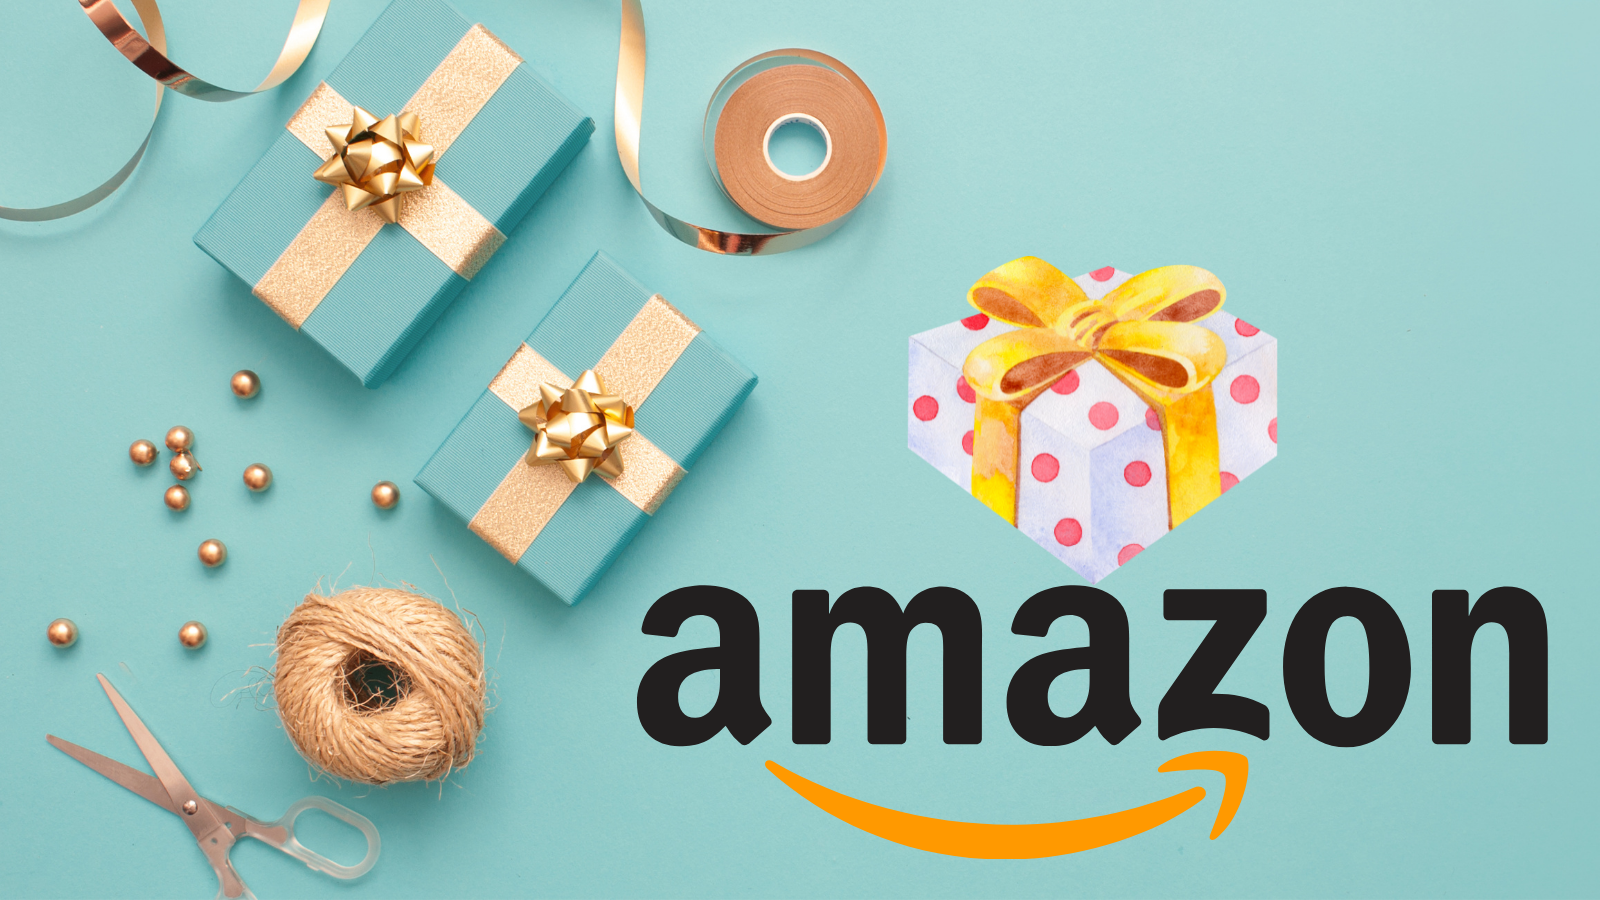 Amazon Gift Wrap 2022: Here's What You Didn't Know